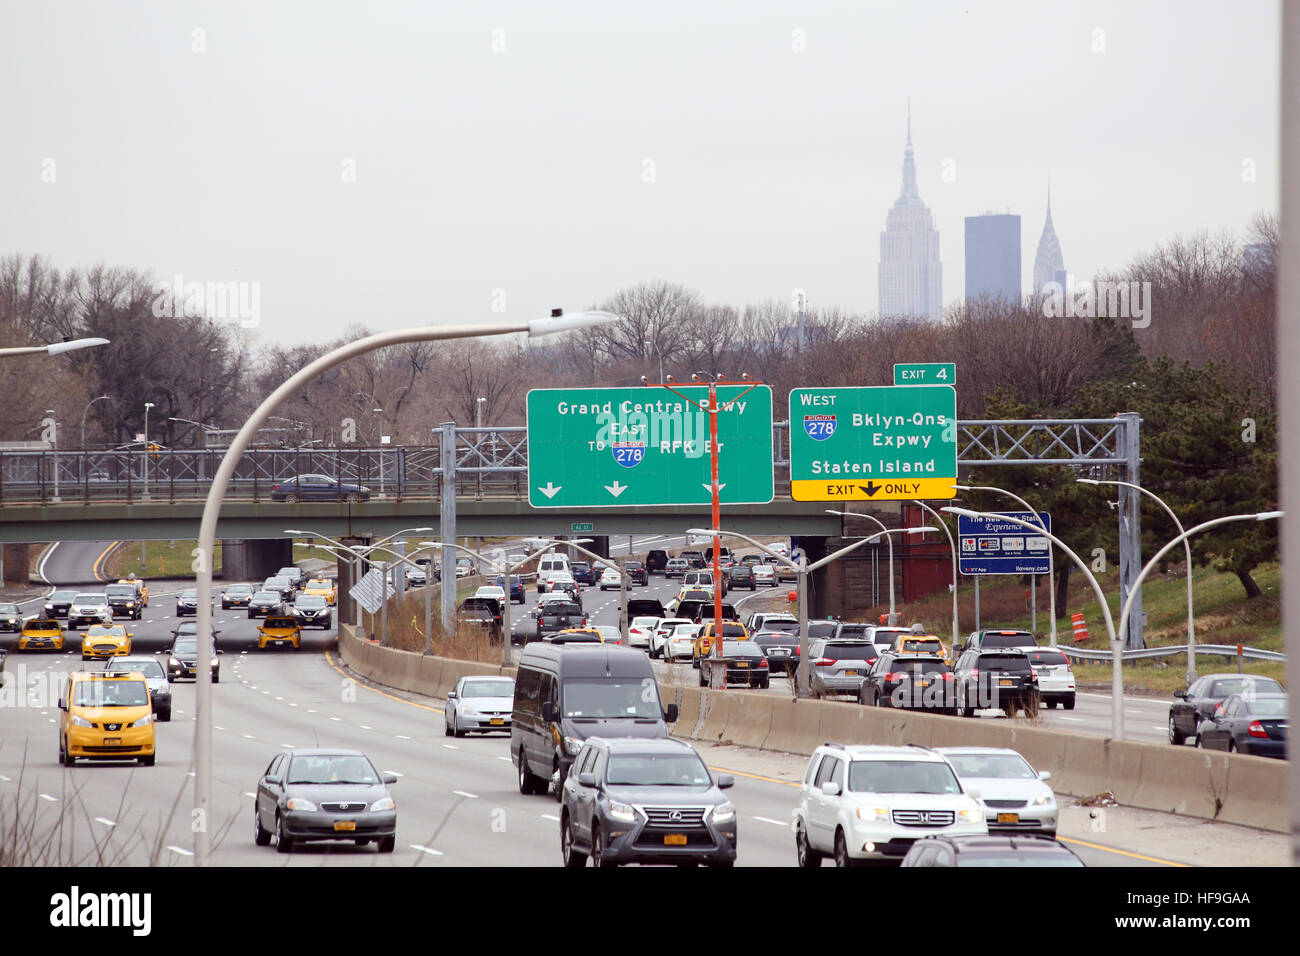 Light traffic on the Grand Central Parkway near Laguardia Airport, Queens, NY, USA Stock Photo